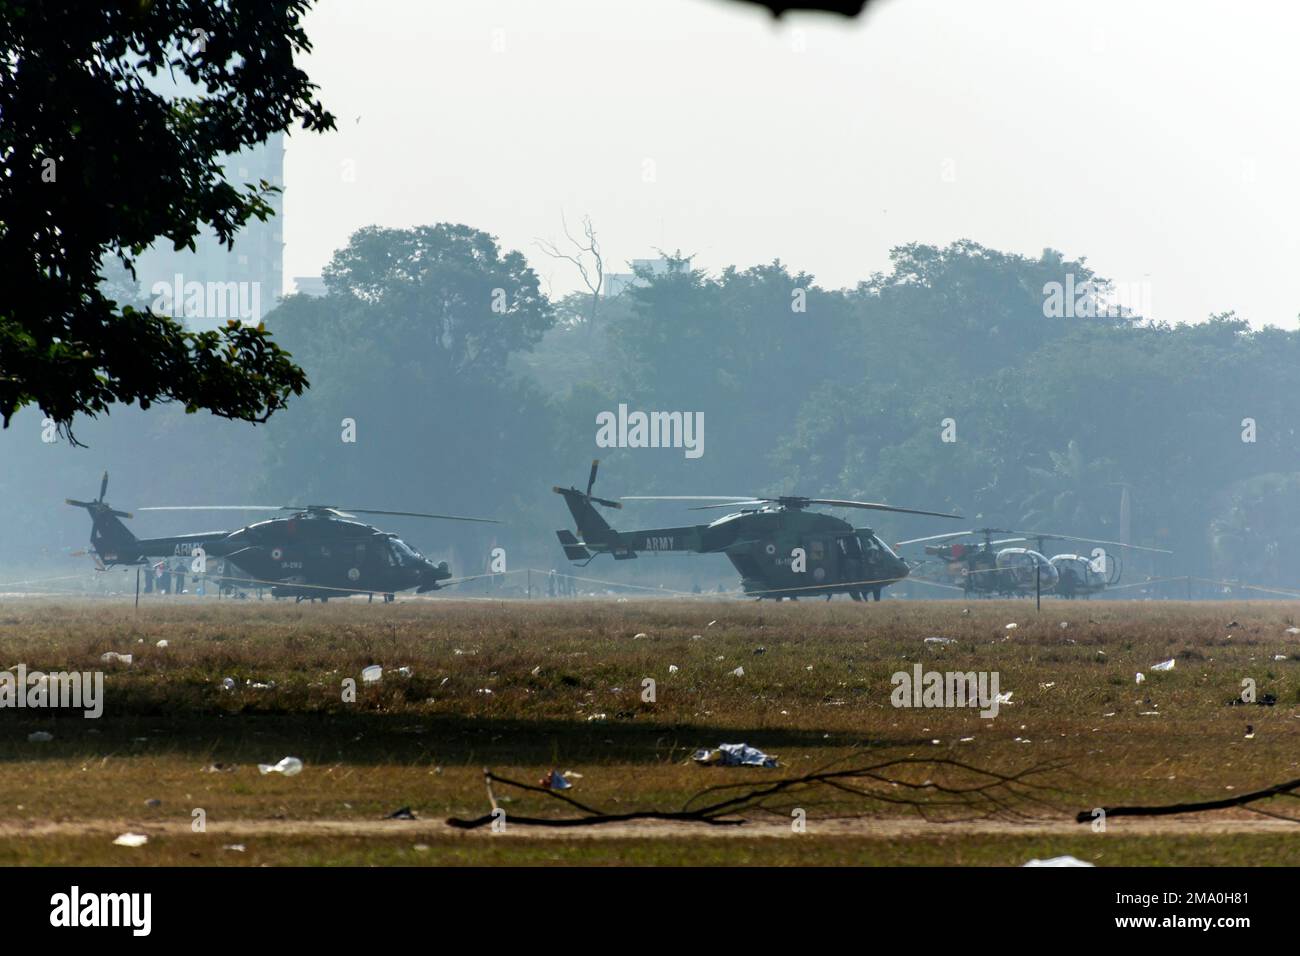 Kolkata, India 15th December 2022. Military helicopter is ready to fly on a ground in a city. Stock Photo